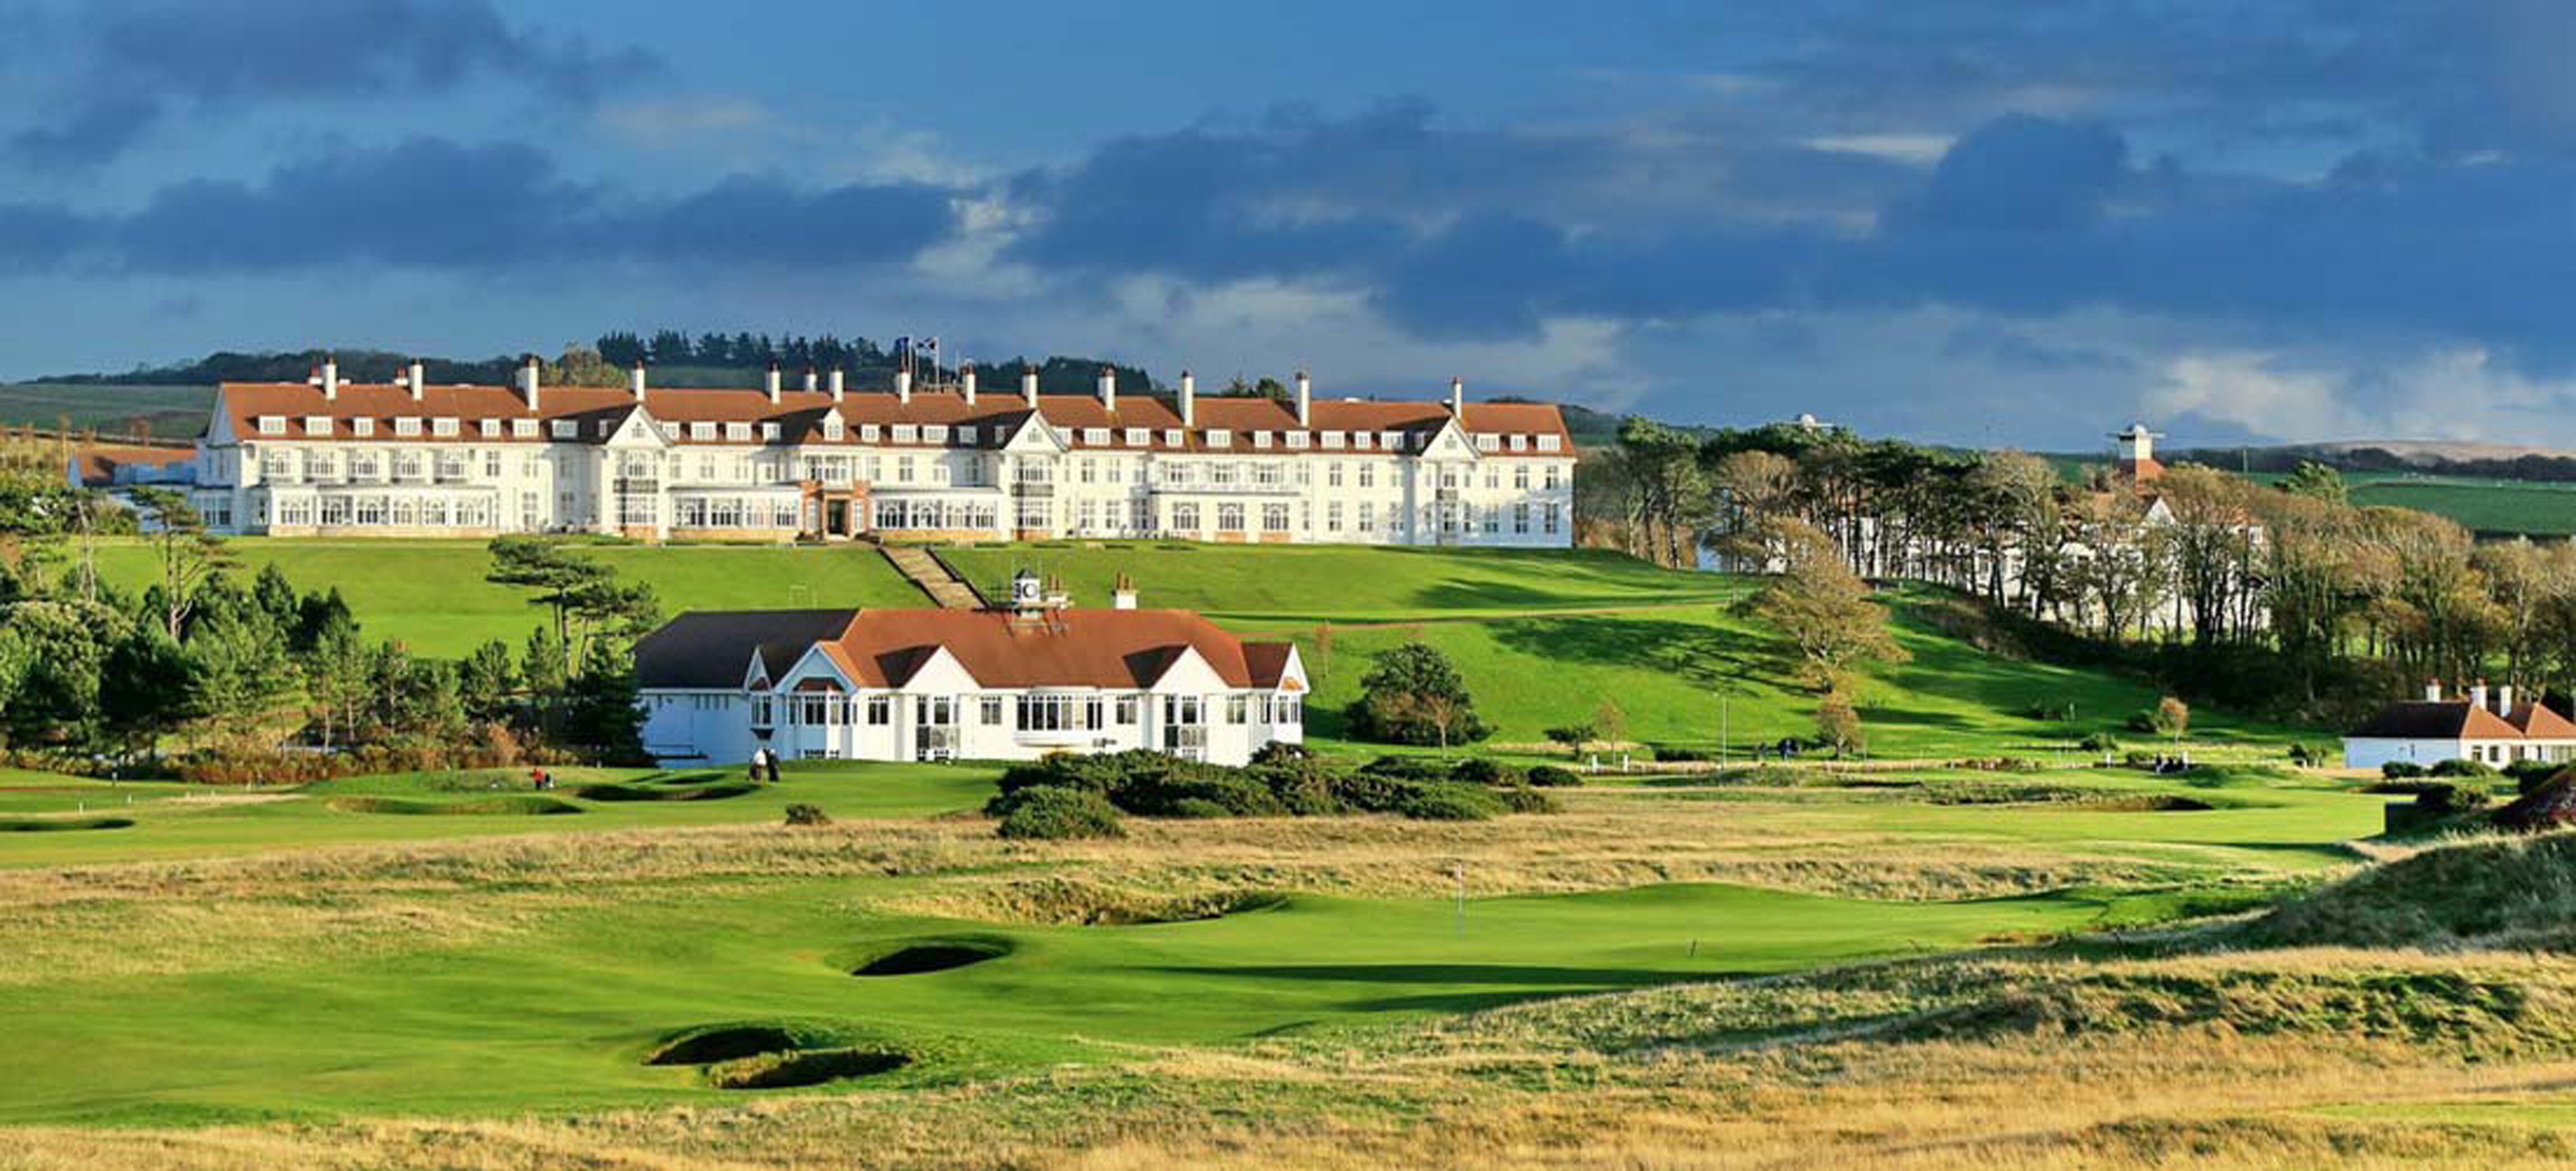 Trump Turnberry returns to pre-Covid trading but losses widen